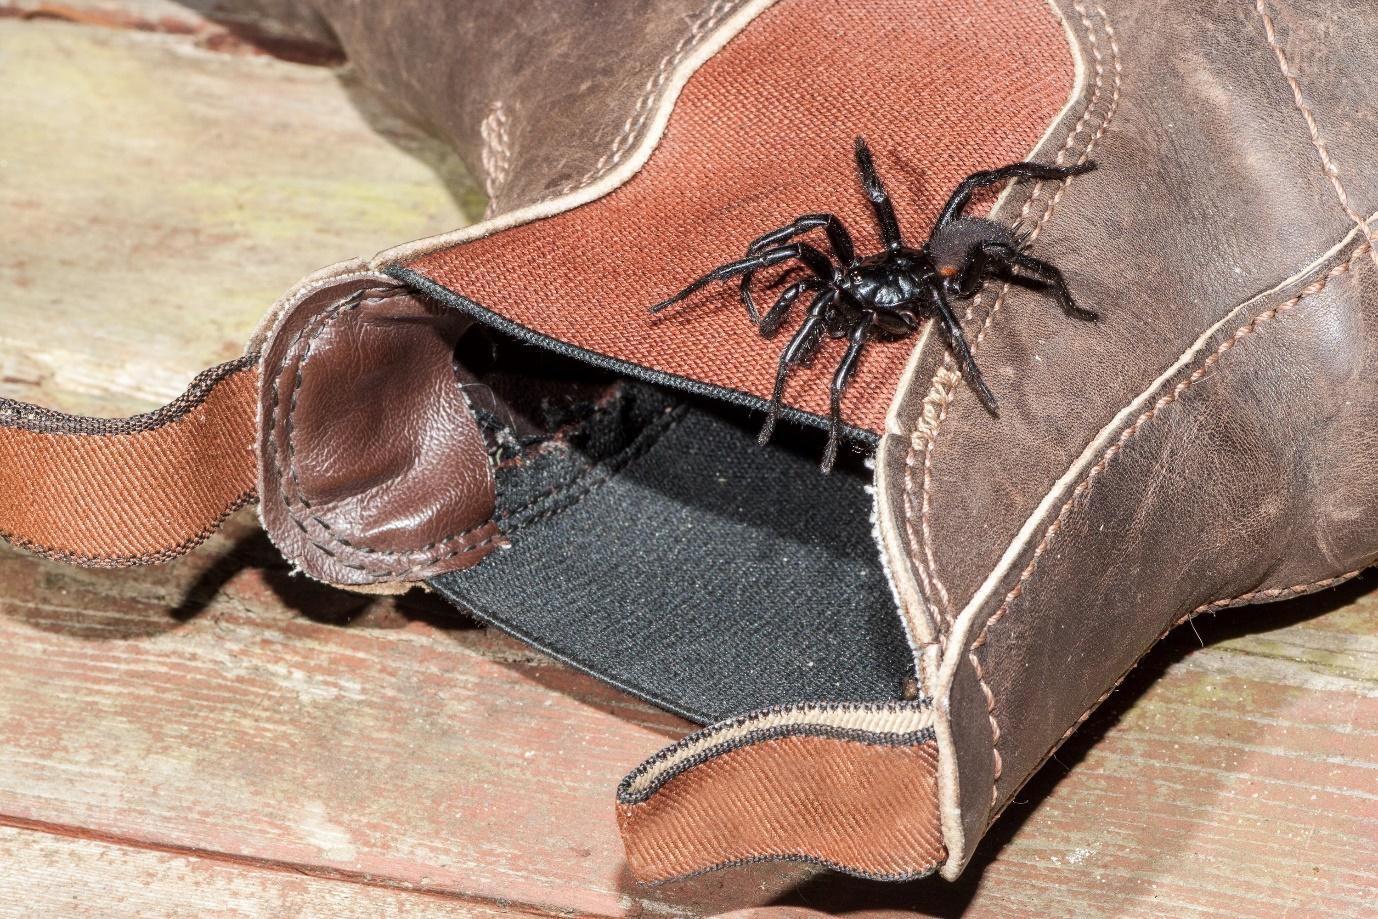 A spider on a shoeDescription automatically generated